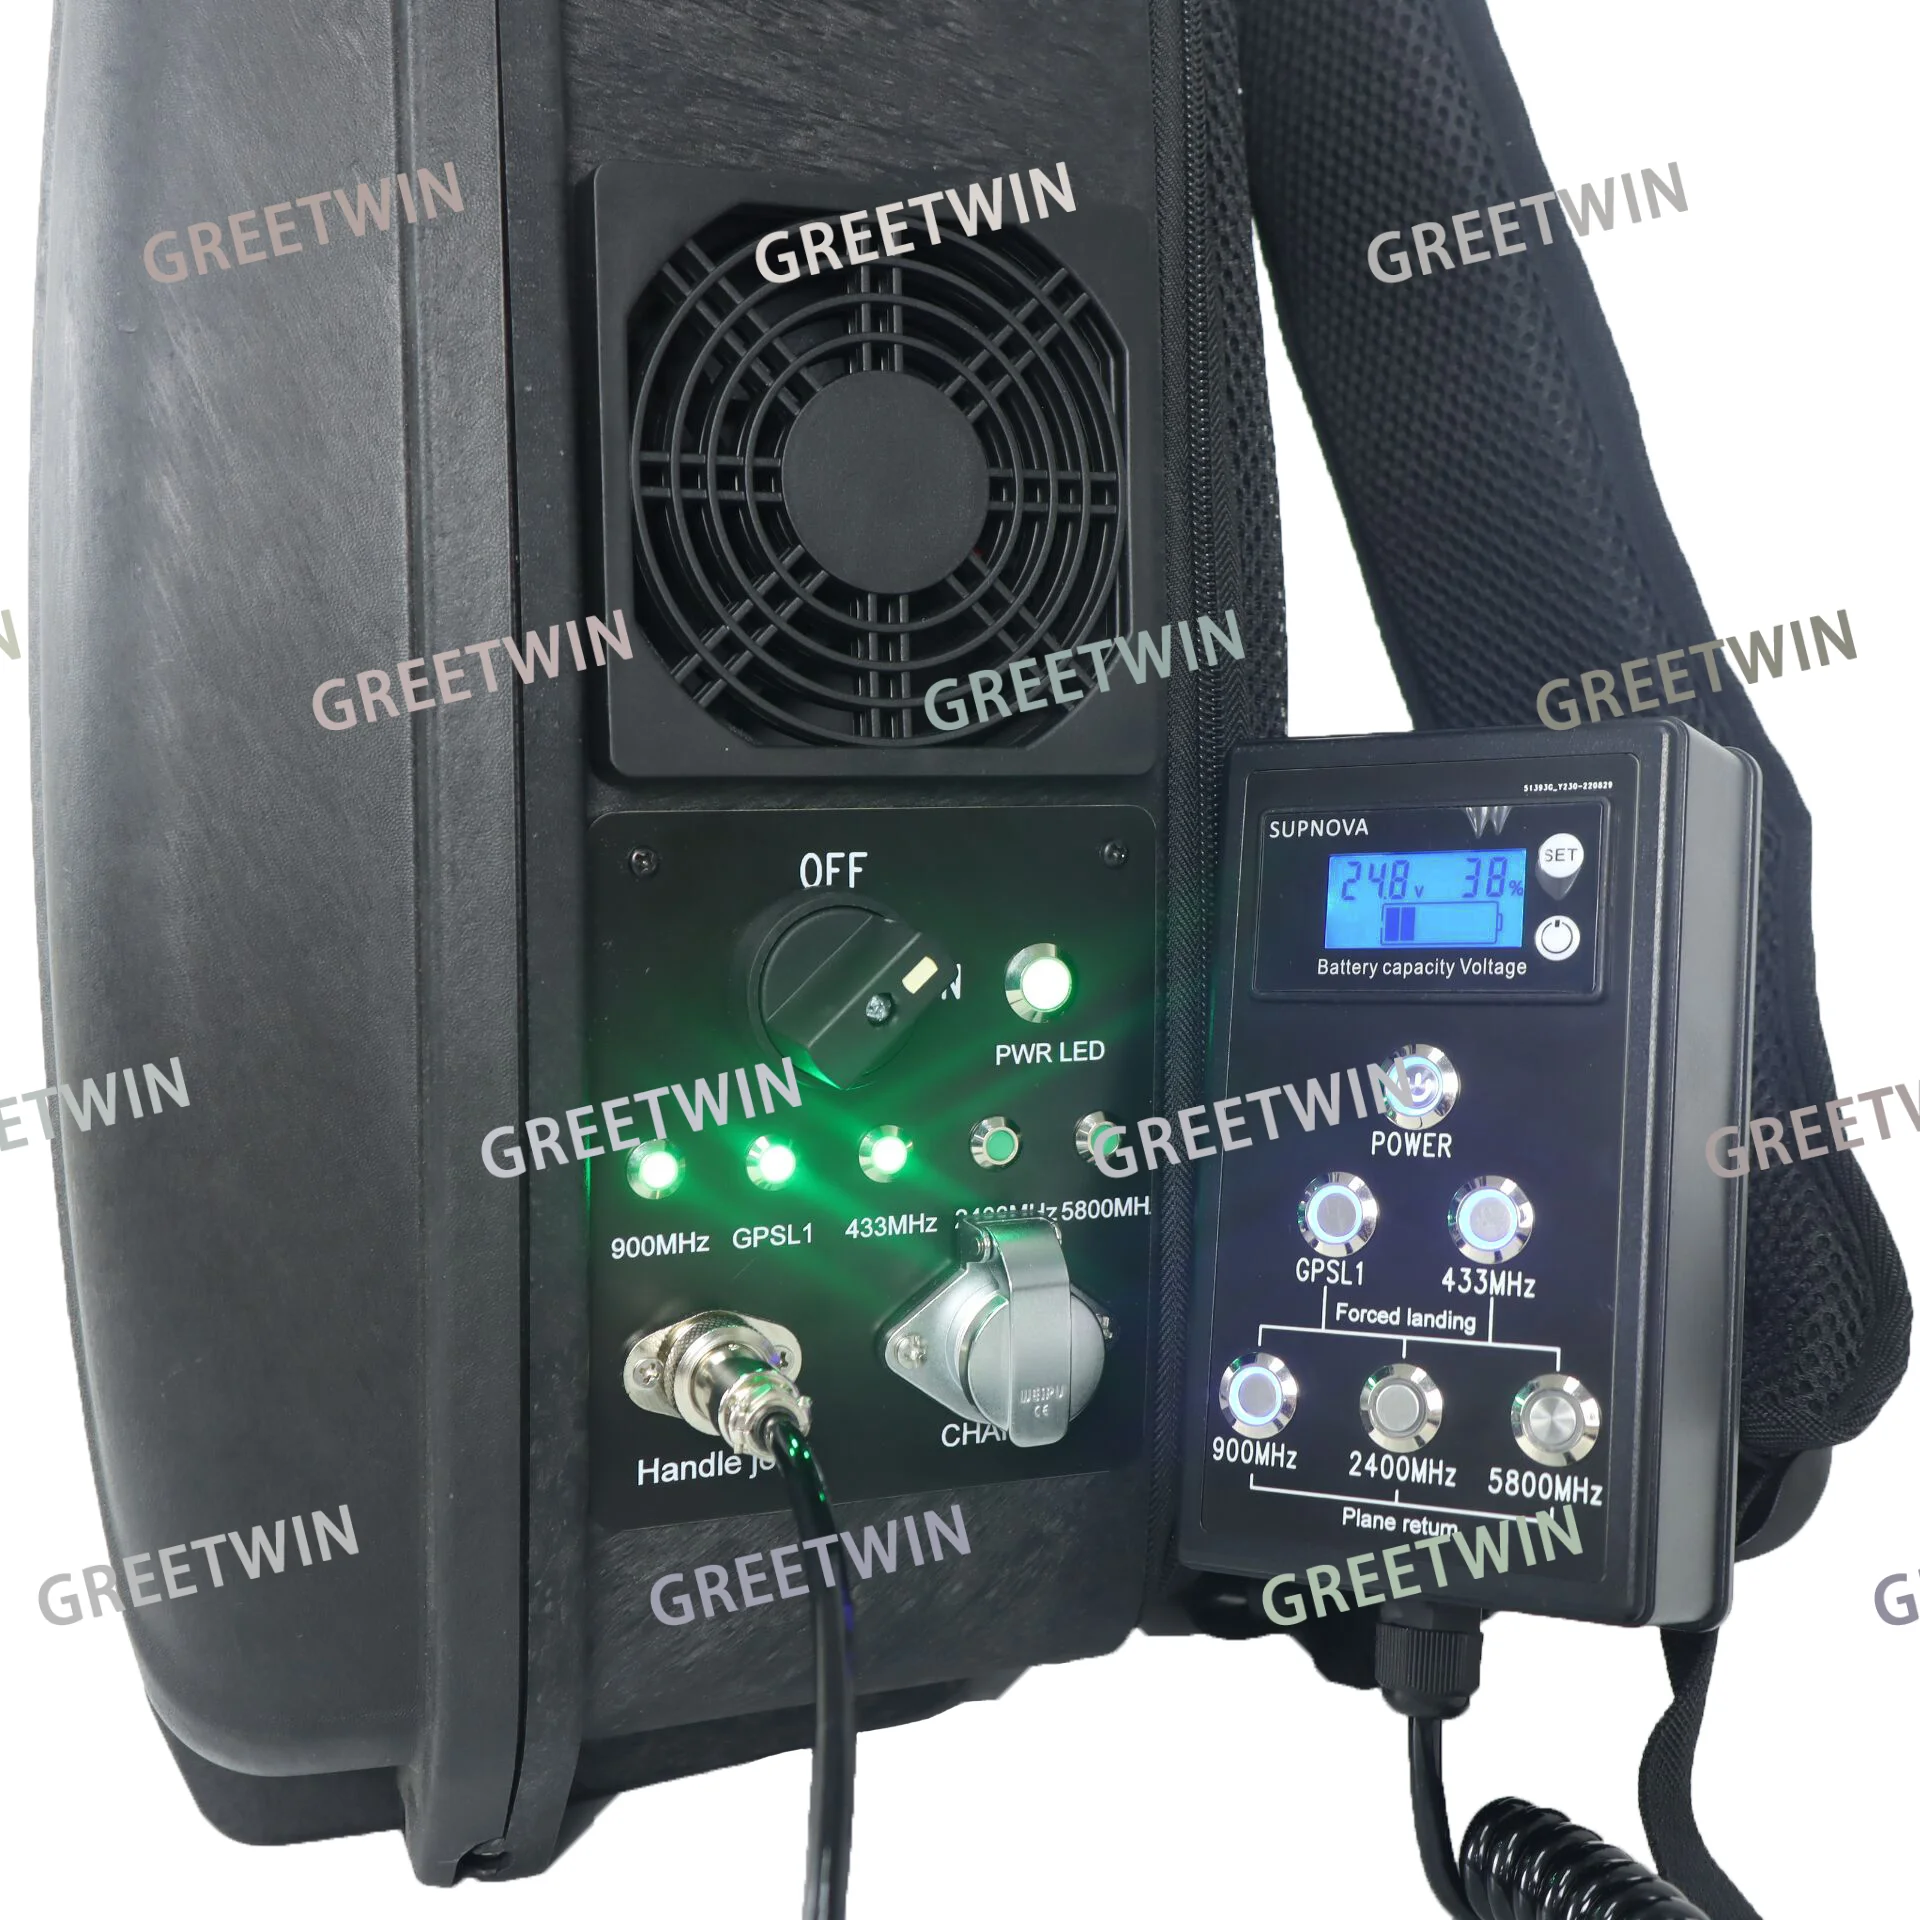 Greetwin 185W 5 Band Backpack Signal detector System to 1.2KM